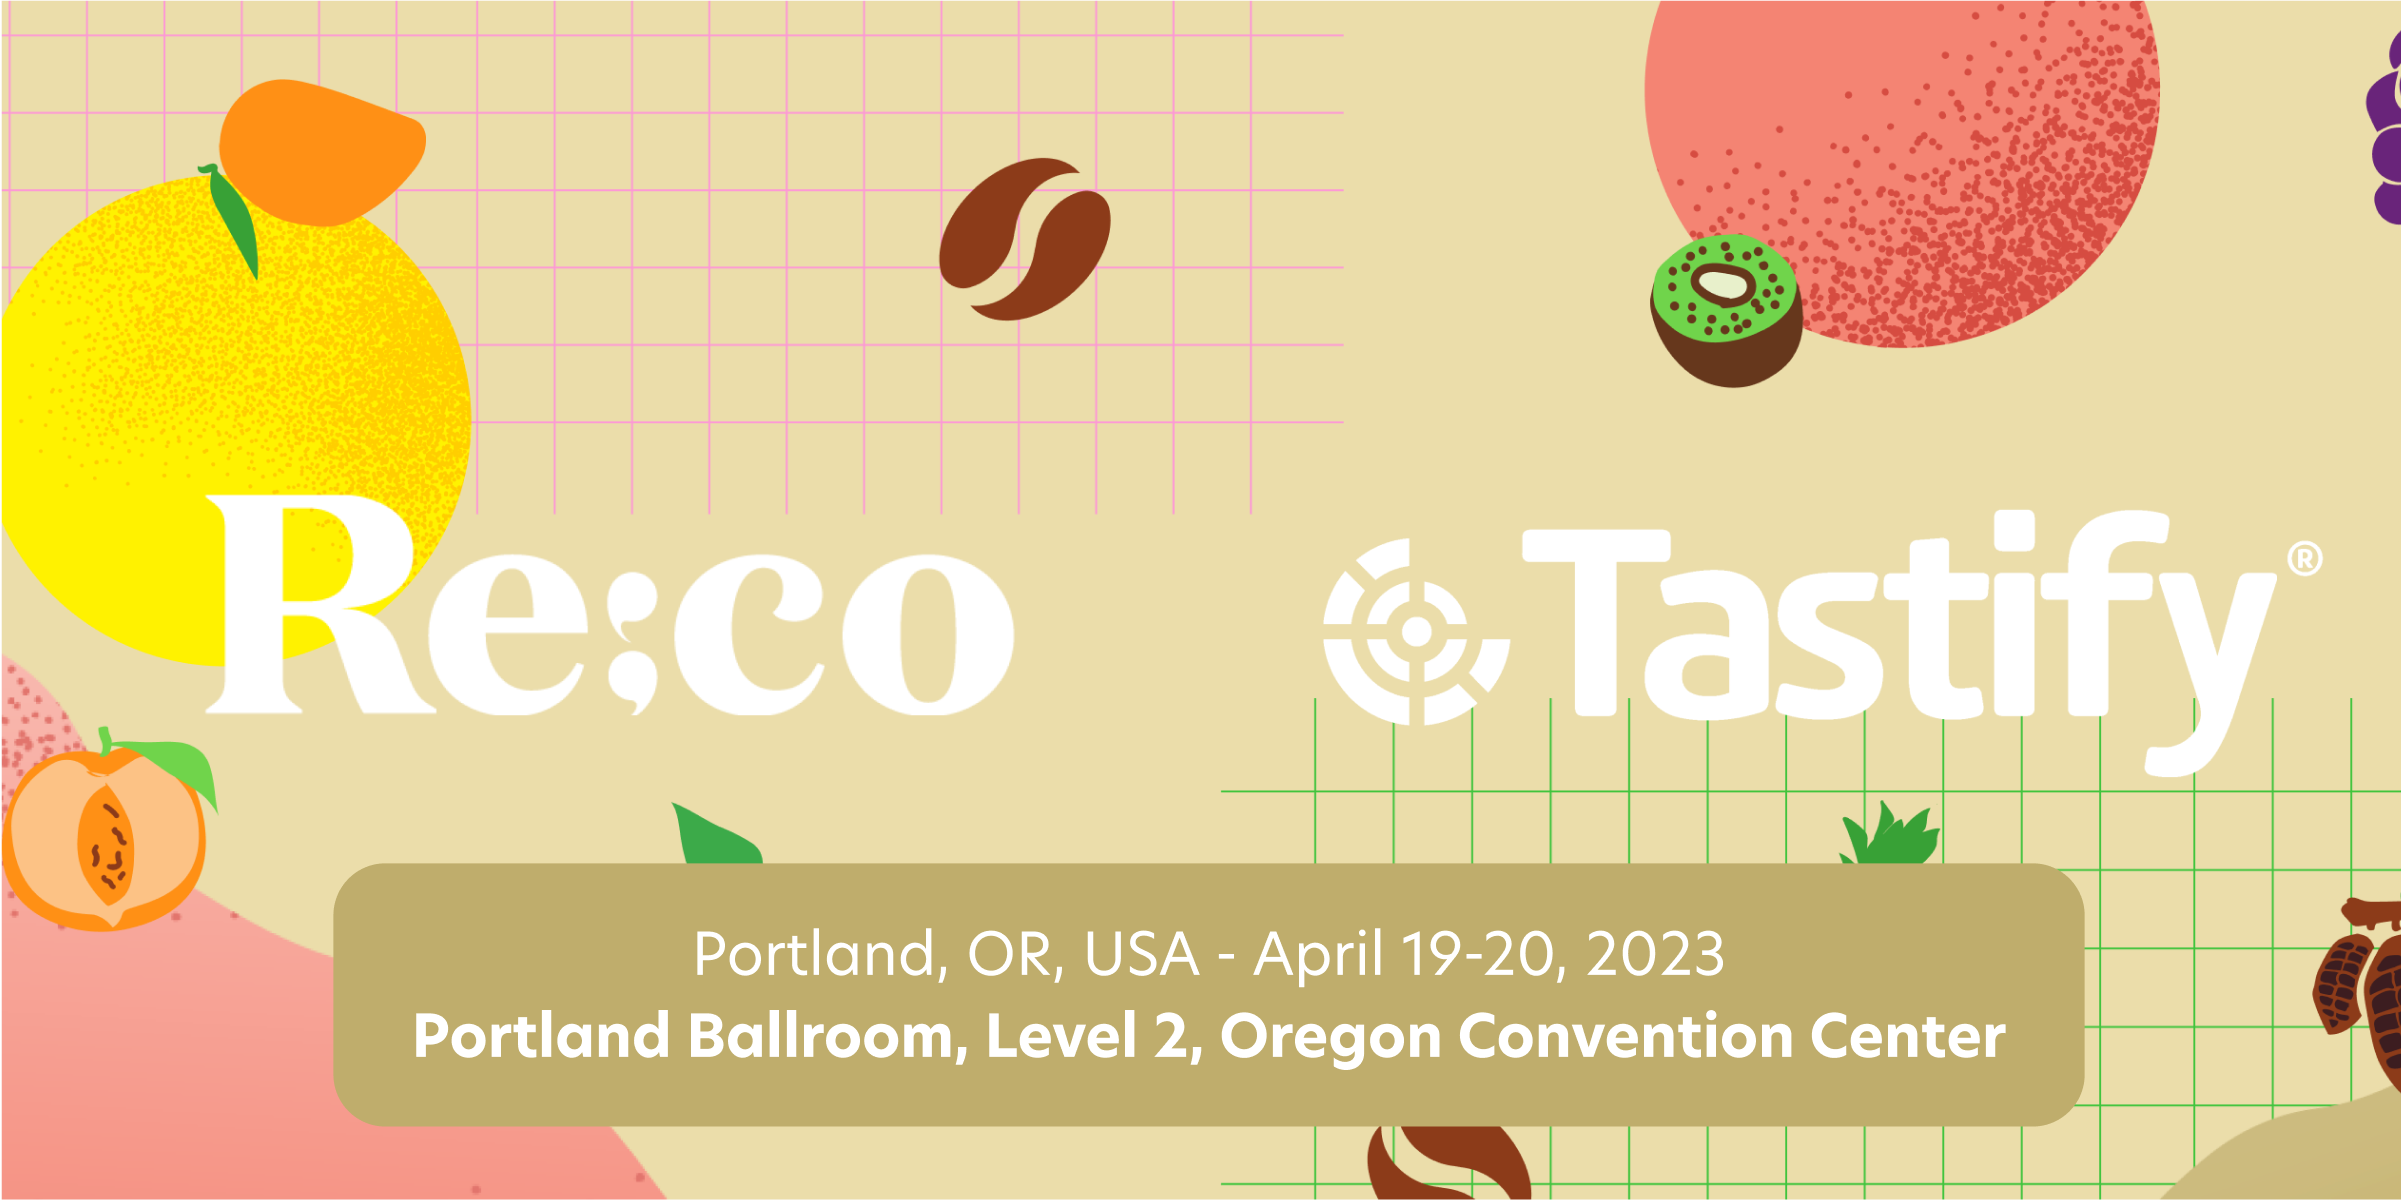 Join Tastify at the Re:co Symposium 2023